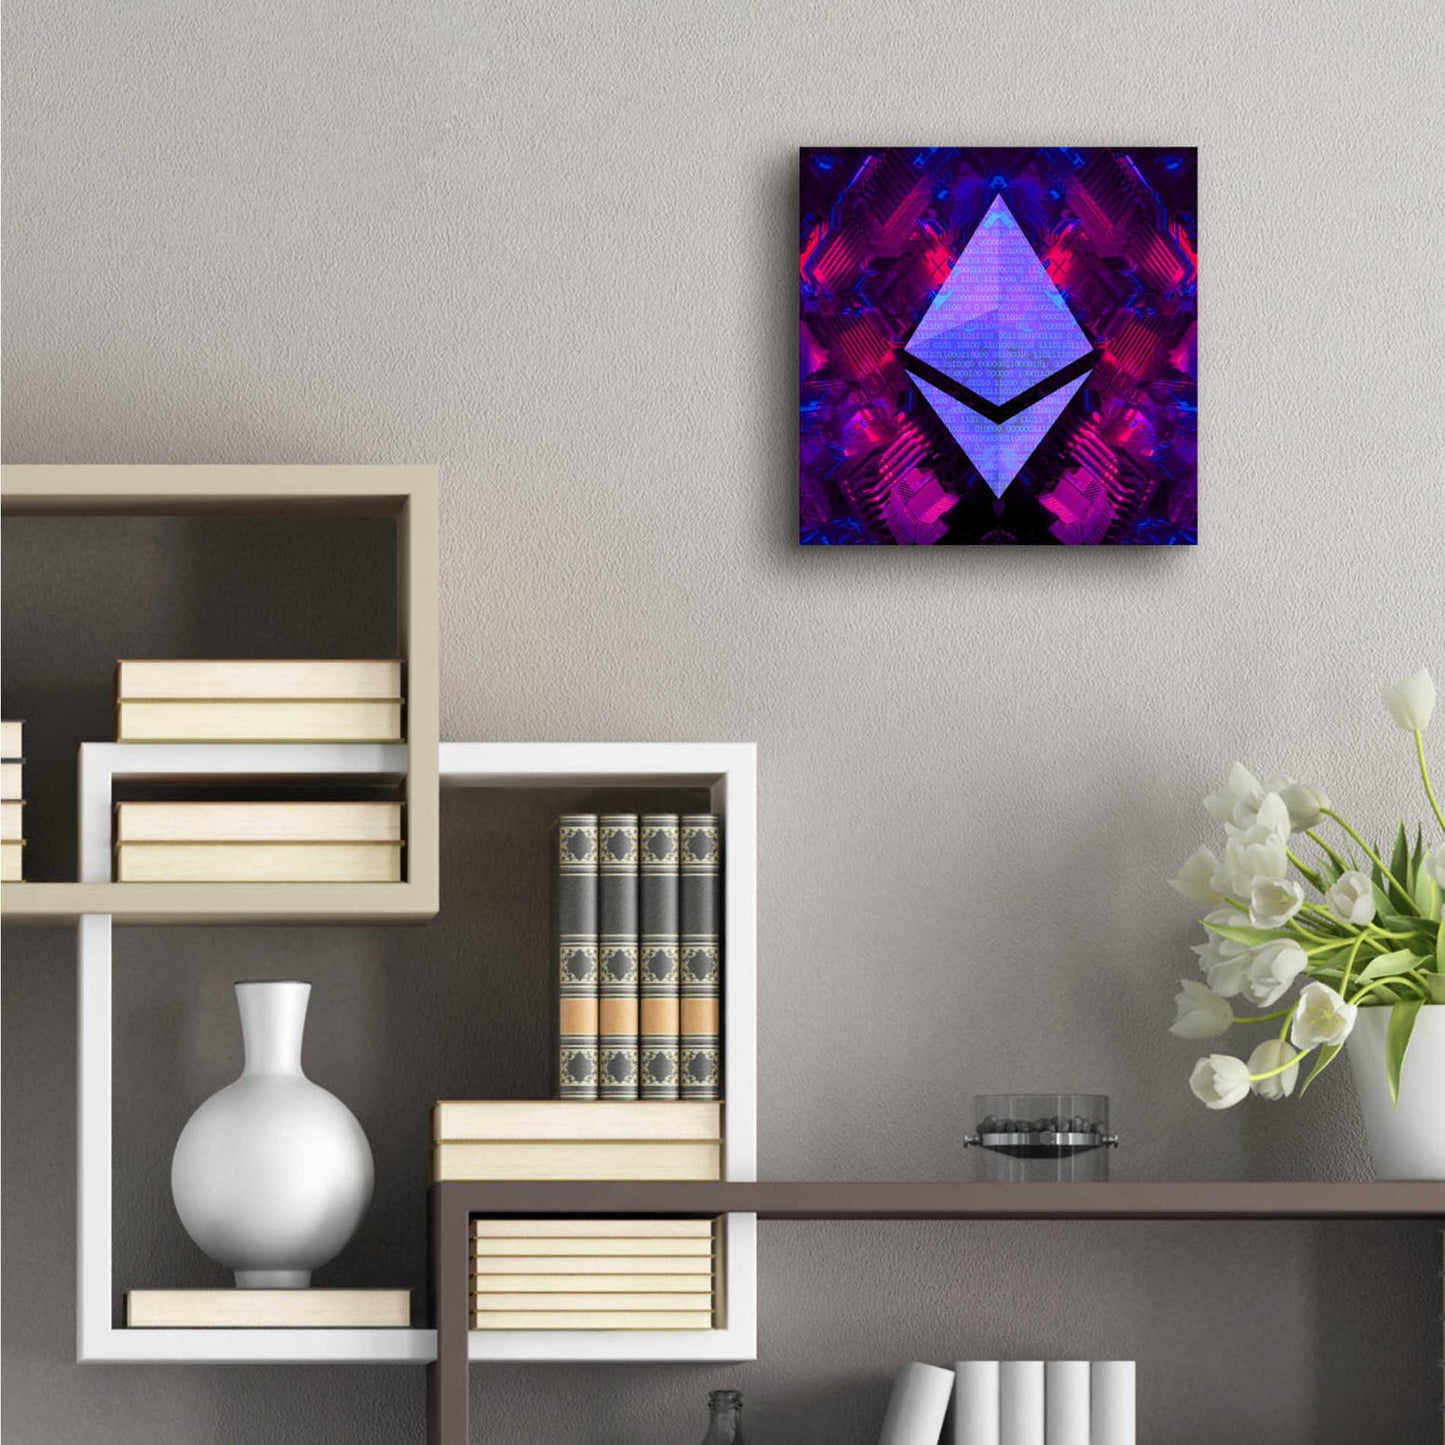 Epic Art 'Ethereum Future' by Cameron Gray Acrylic Glass Wall Art,12x12